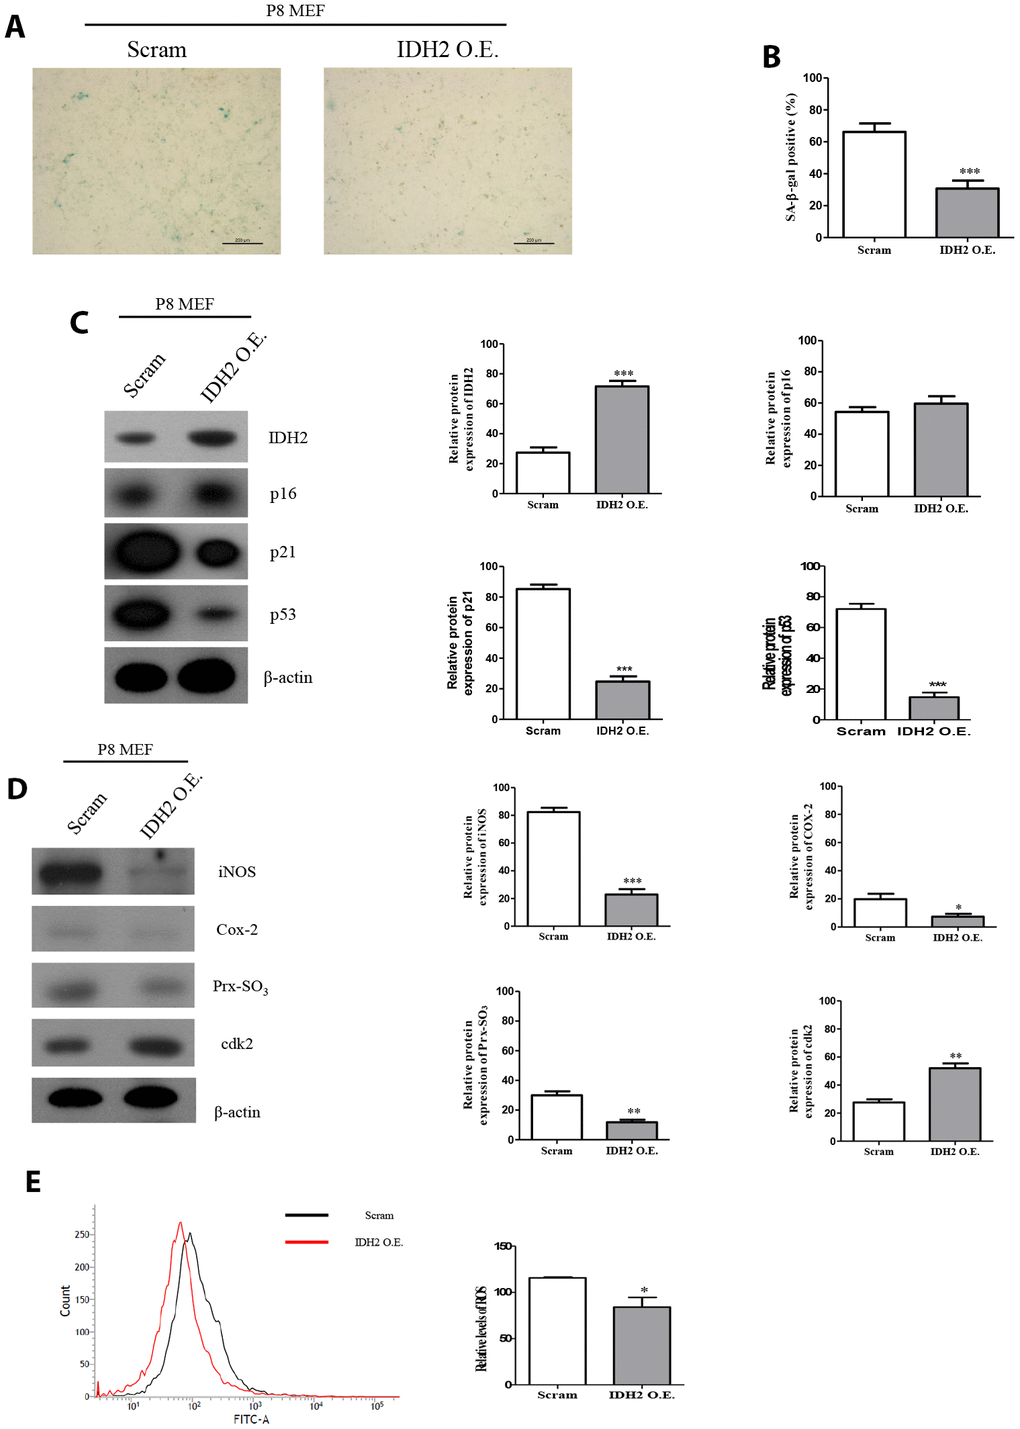 Overexpression of Idh2 prevents the acceleration of senescence in mouse embryonic fibroblasts (MEFs). (A) SA-β-gal staining of control and Idh2-overexpressing MEFs. pLenti 6.3 Idh2 plasmid was transfected into Passage 8 (P8) MEFs. (B) Statistical analysis of SA-β-gal-stained positive cells between control and Idh2-overexpressing MEFs. (C) Senescence-associated marker proteins were detected using western blot analysis in control and Idh2-overexpressing MEFs. The following antibodies were used for detection: anti-Idh2, anti-p16, anti-p21, anti-p53, and anti-β-actin. (D) Pro-inflammatory mediators, reactive oxygen species (ROS) marker proteins, and cyclin-dependent kinase 2 were detected using western blot analysis. The following antibodies were used for detection: anti-iNOS, anti-Cox-2, anti-Prx-SO3, and anti-β-actin. (E) Relative intracellular ROS levels were detected in control and Idh2-overexpressing MEFs. Intracellular ROS were detected by flow cytometry. Data are expressed as means ± SD (n = 3). *p p p 